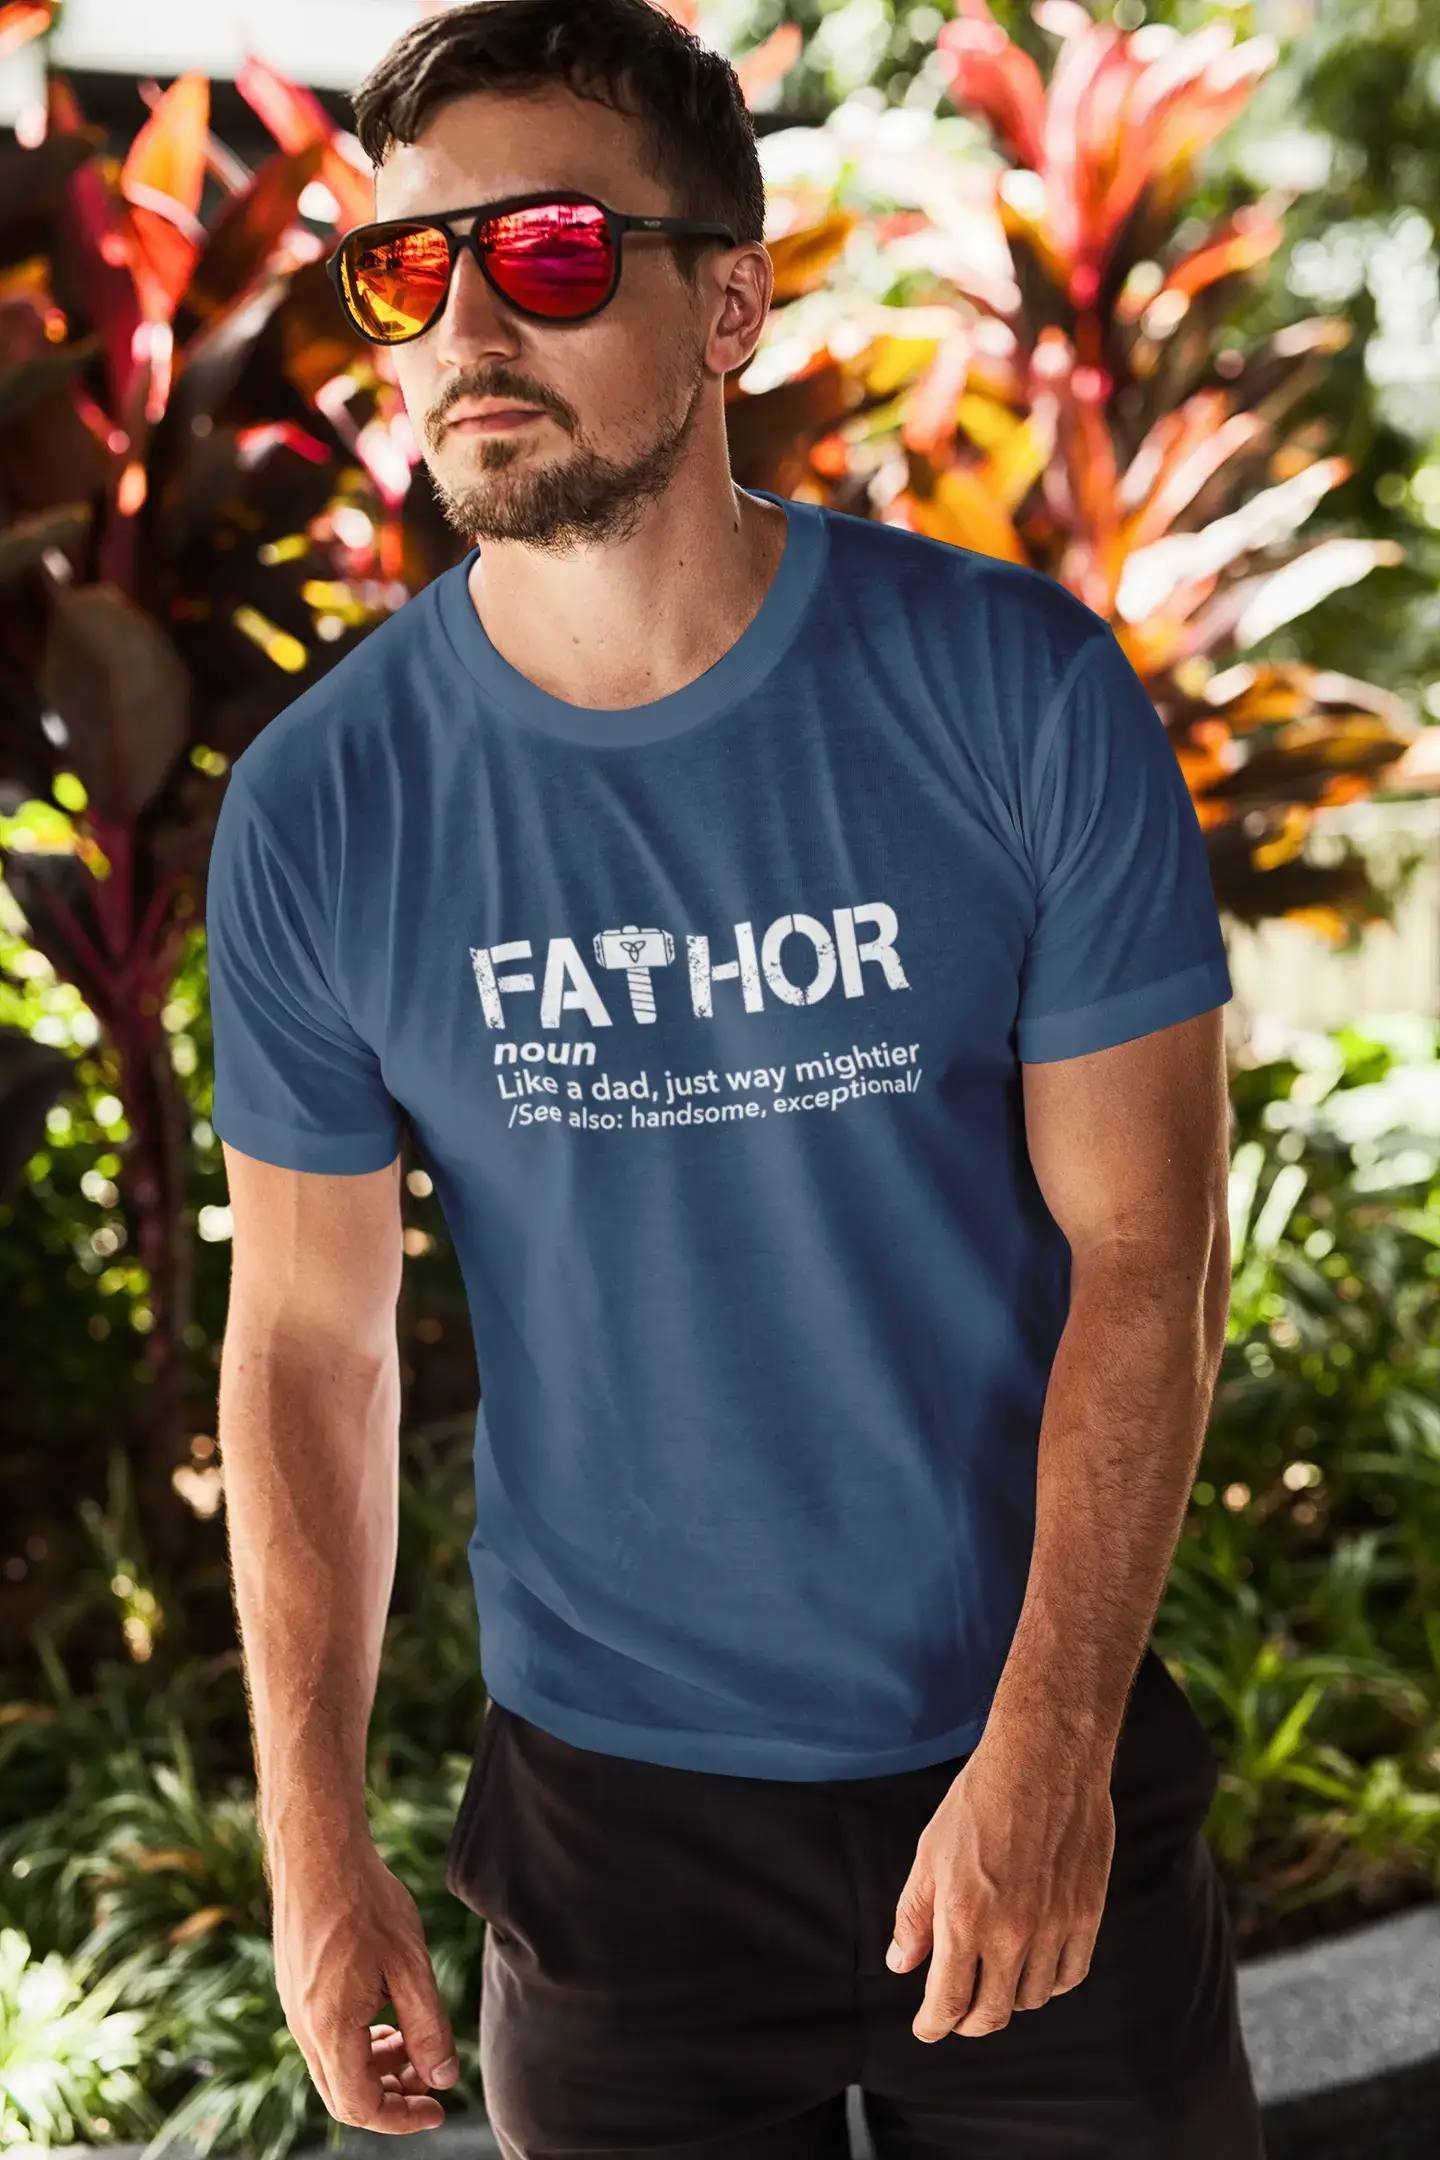 ULTRABASIC - Graphic Men's Fa-Thor Like Dad Just Way Mightier Shirt Printed Letters Deep Black